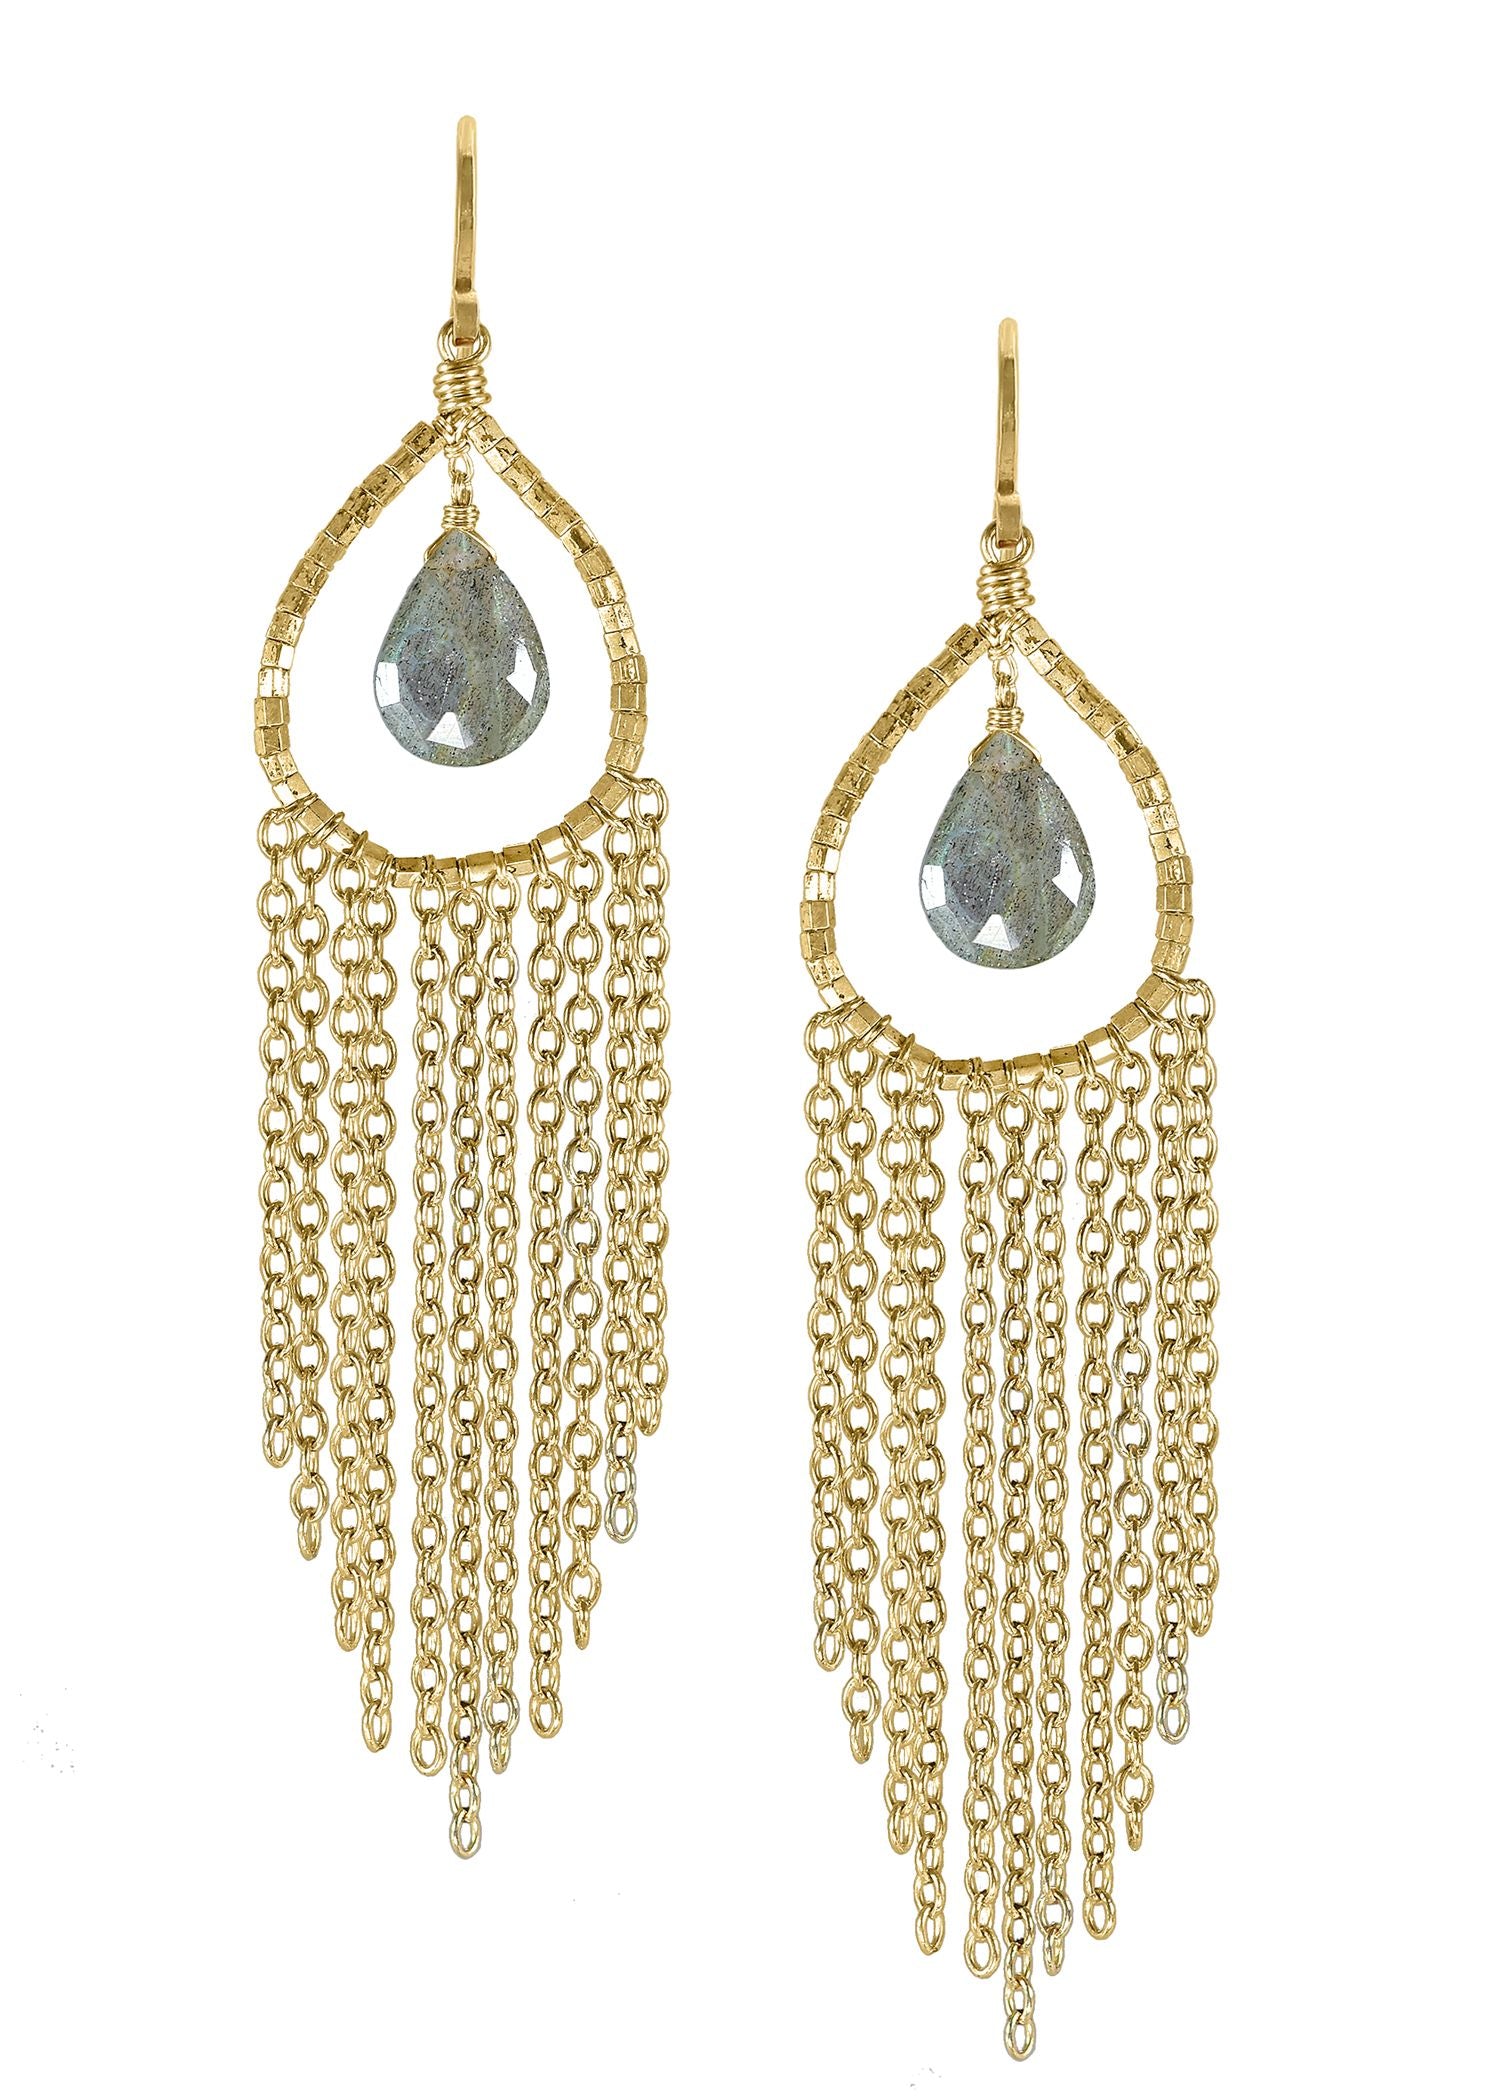 Labradorite 14k gold fill Earrings measure 3-1/8" in length (including the ear wires) and 11/16" in width Handmade in our Los Angeles studio